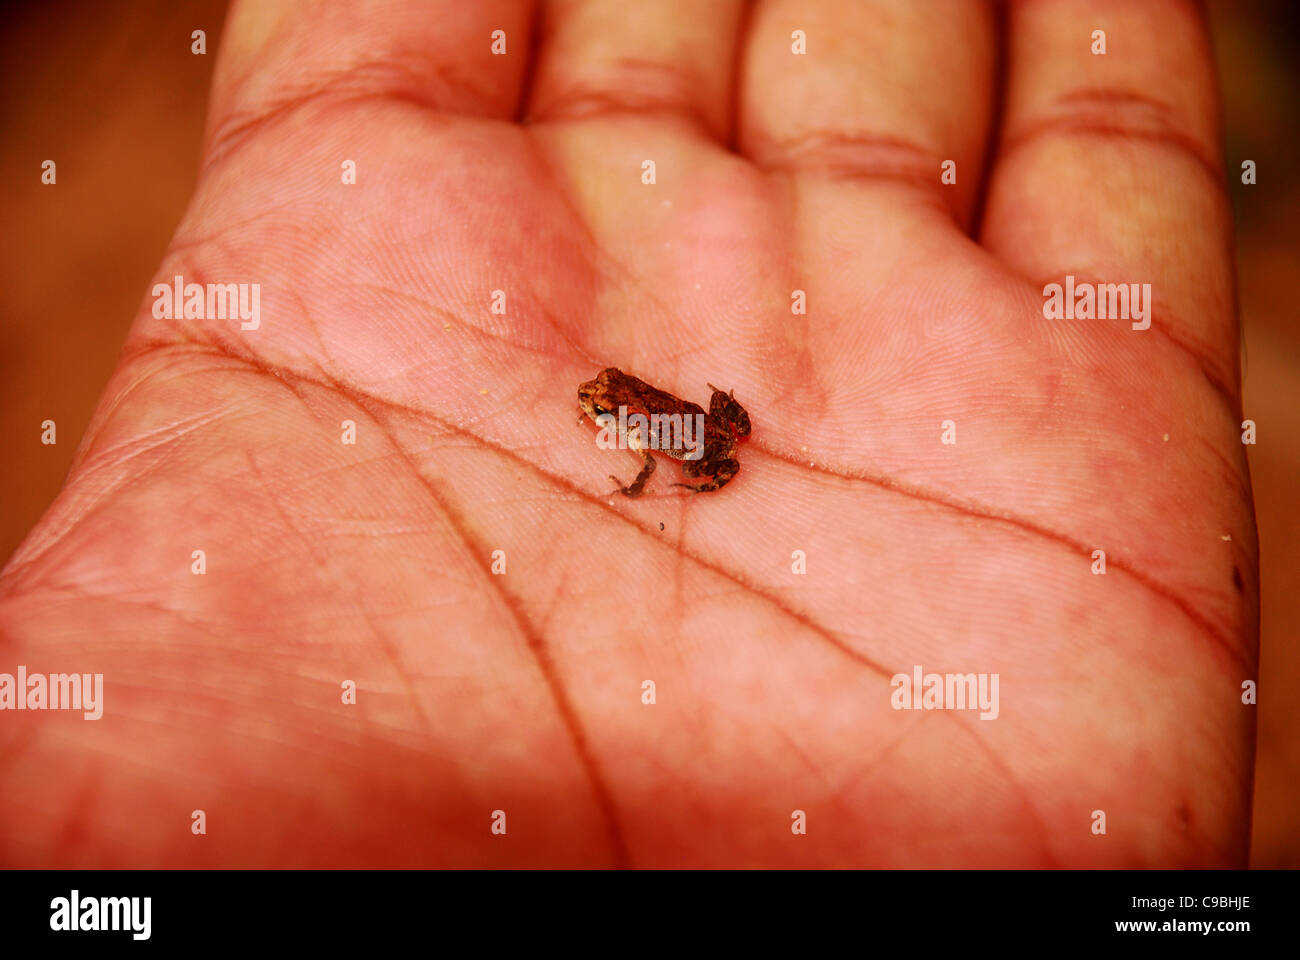 Tiny frog on the palm of a man Stock Photo